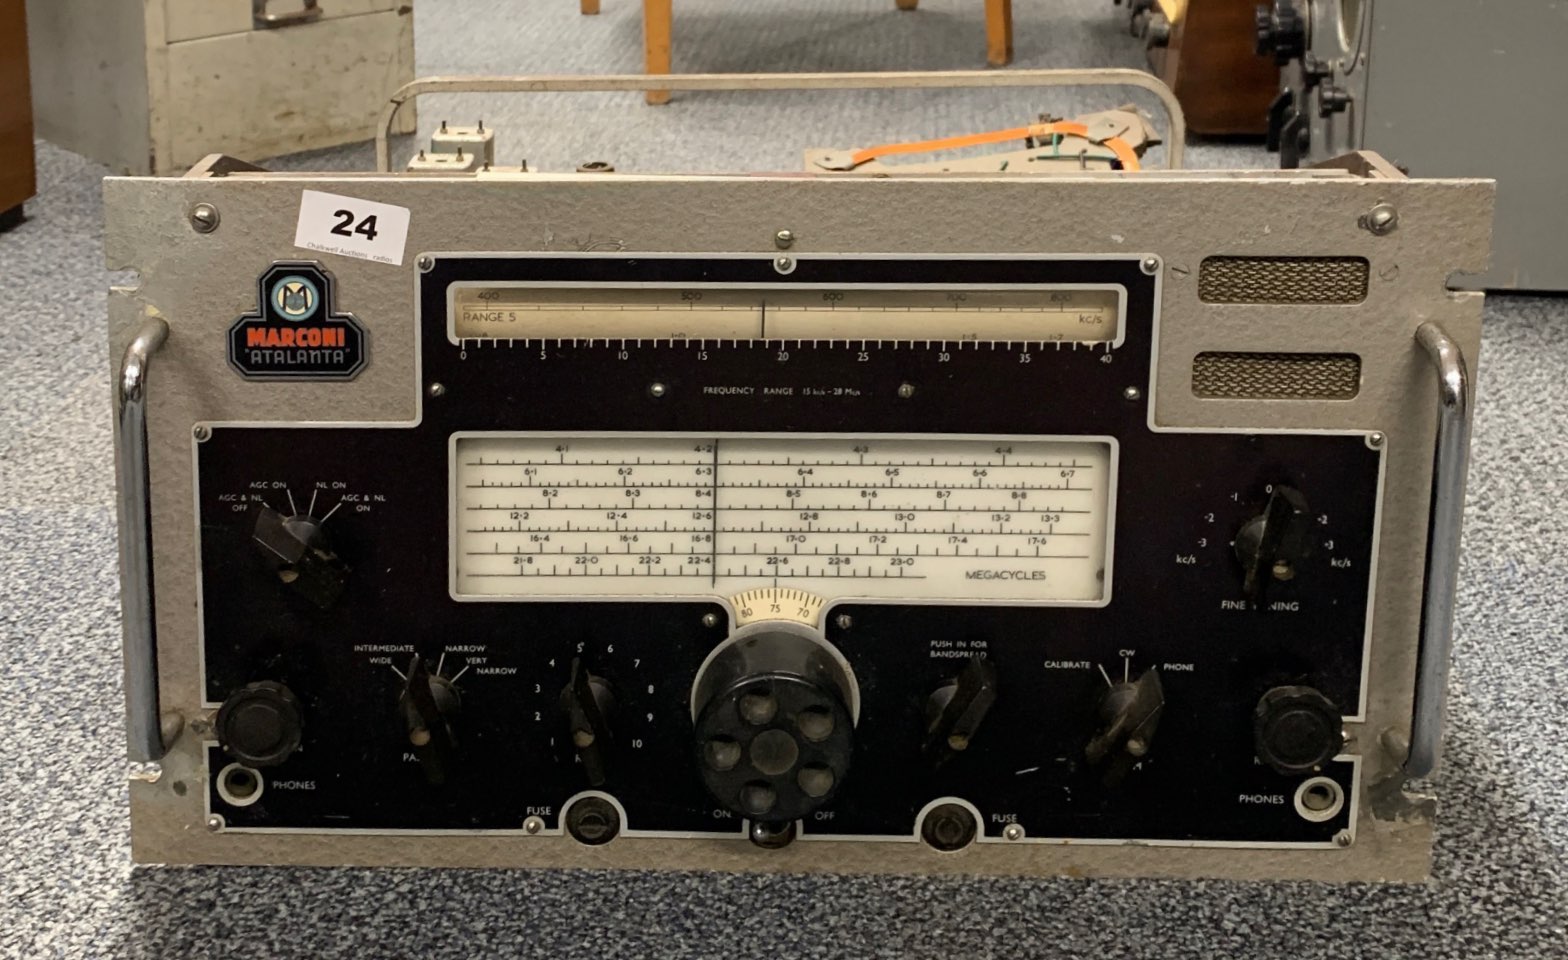 An Marconi Atalanta communication receiver without a case.